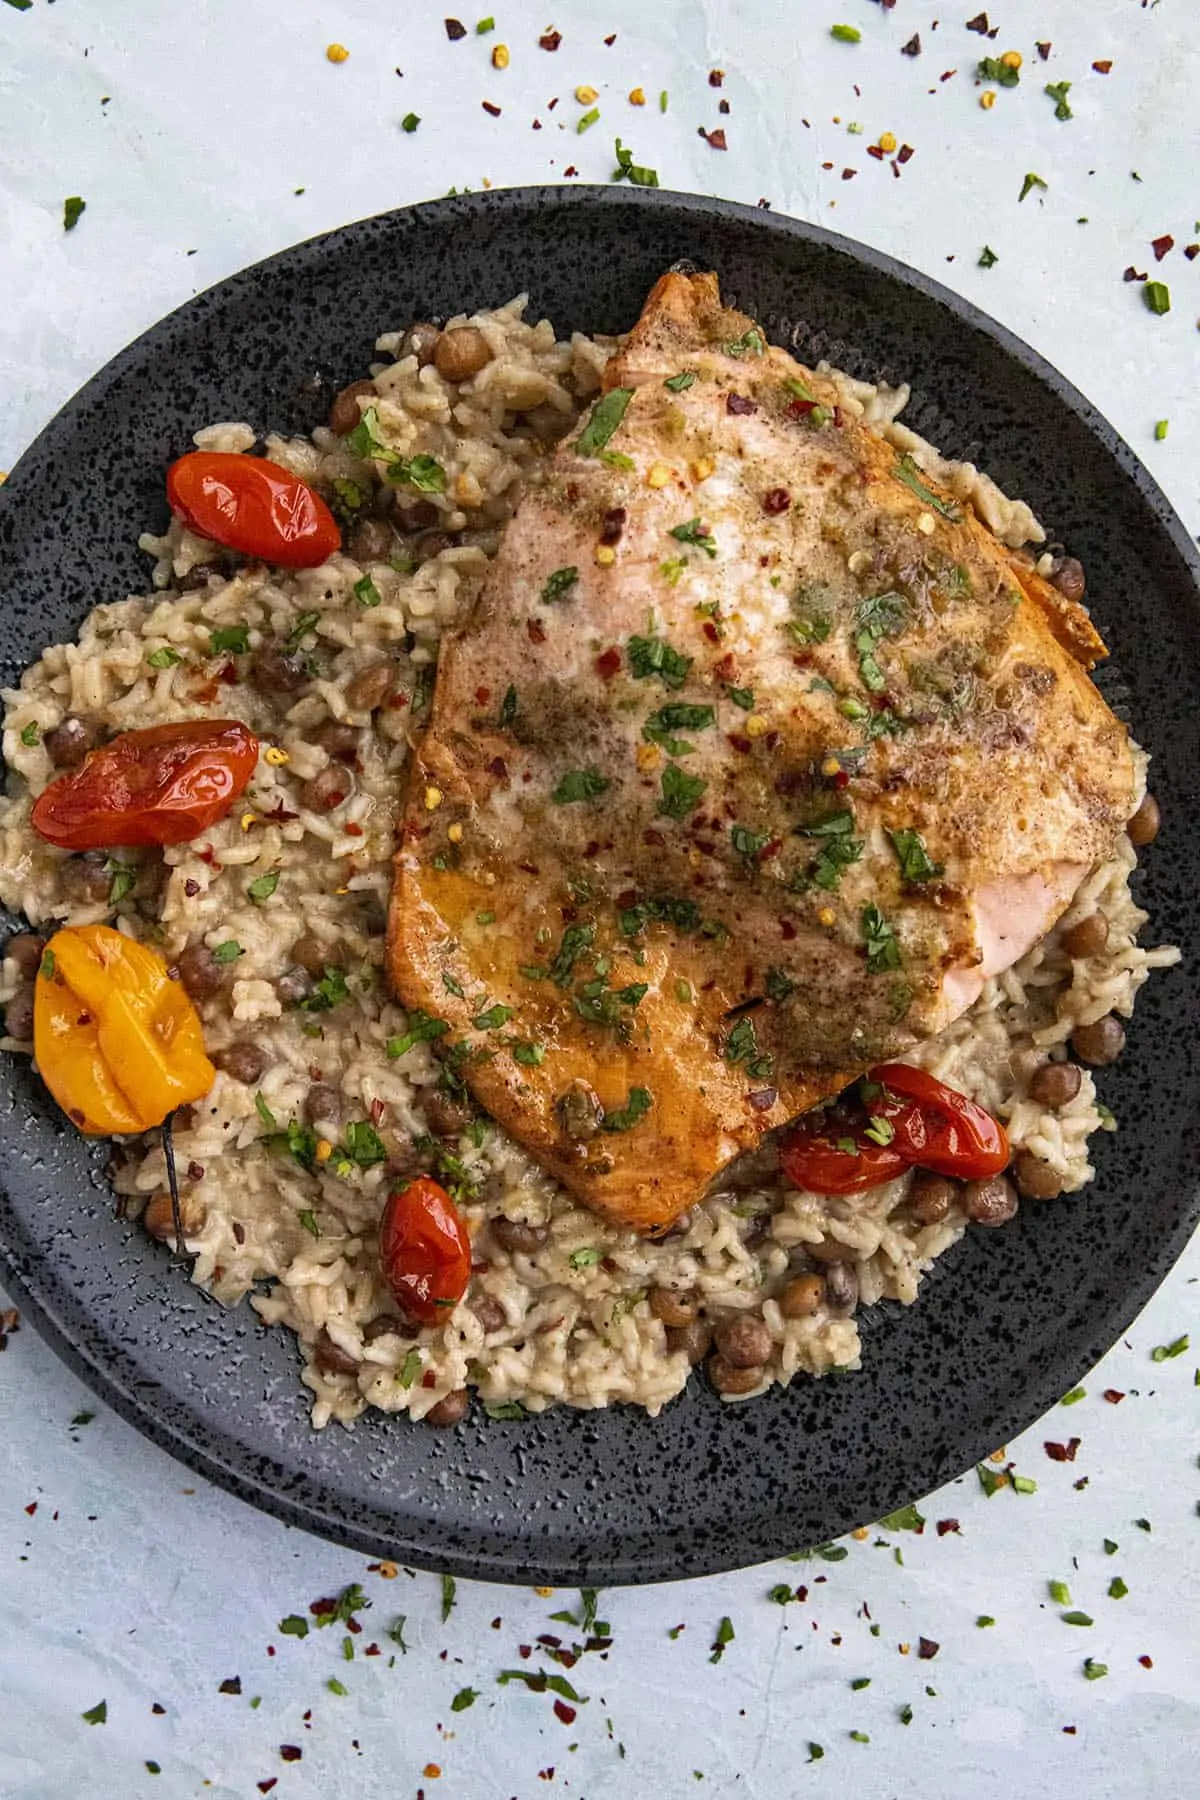 Spicy Jerk Salmon served over Jamaican rice and peas